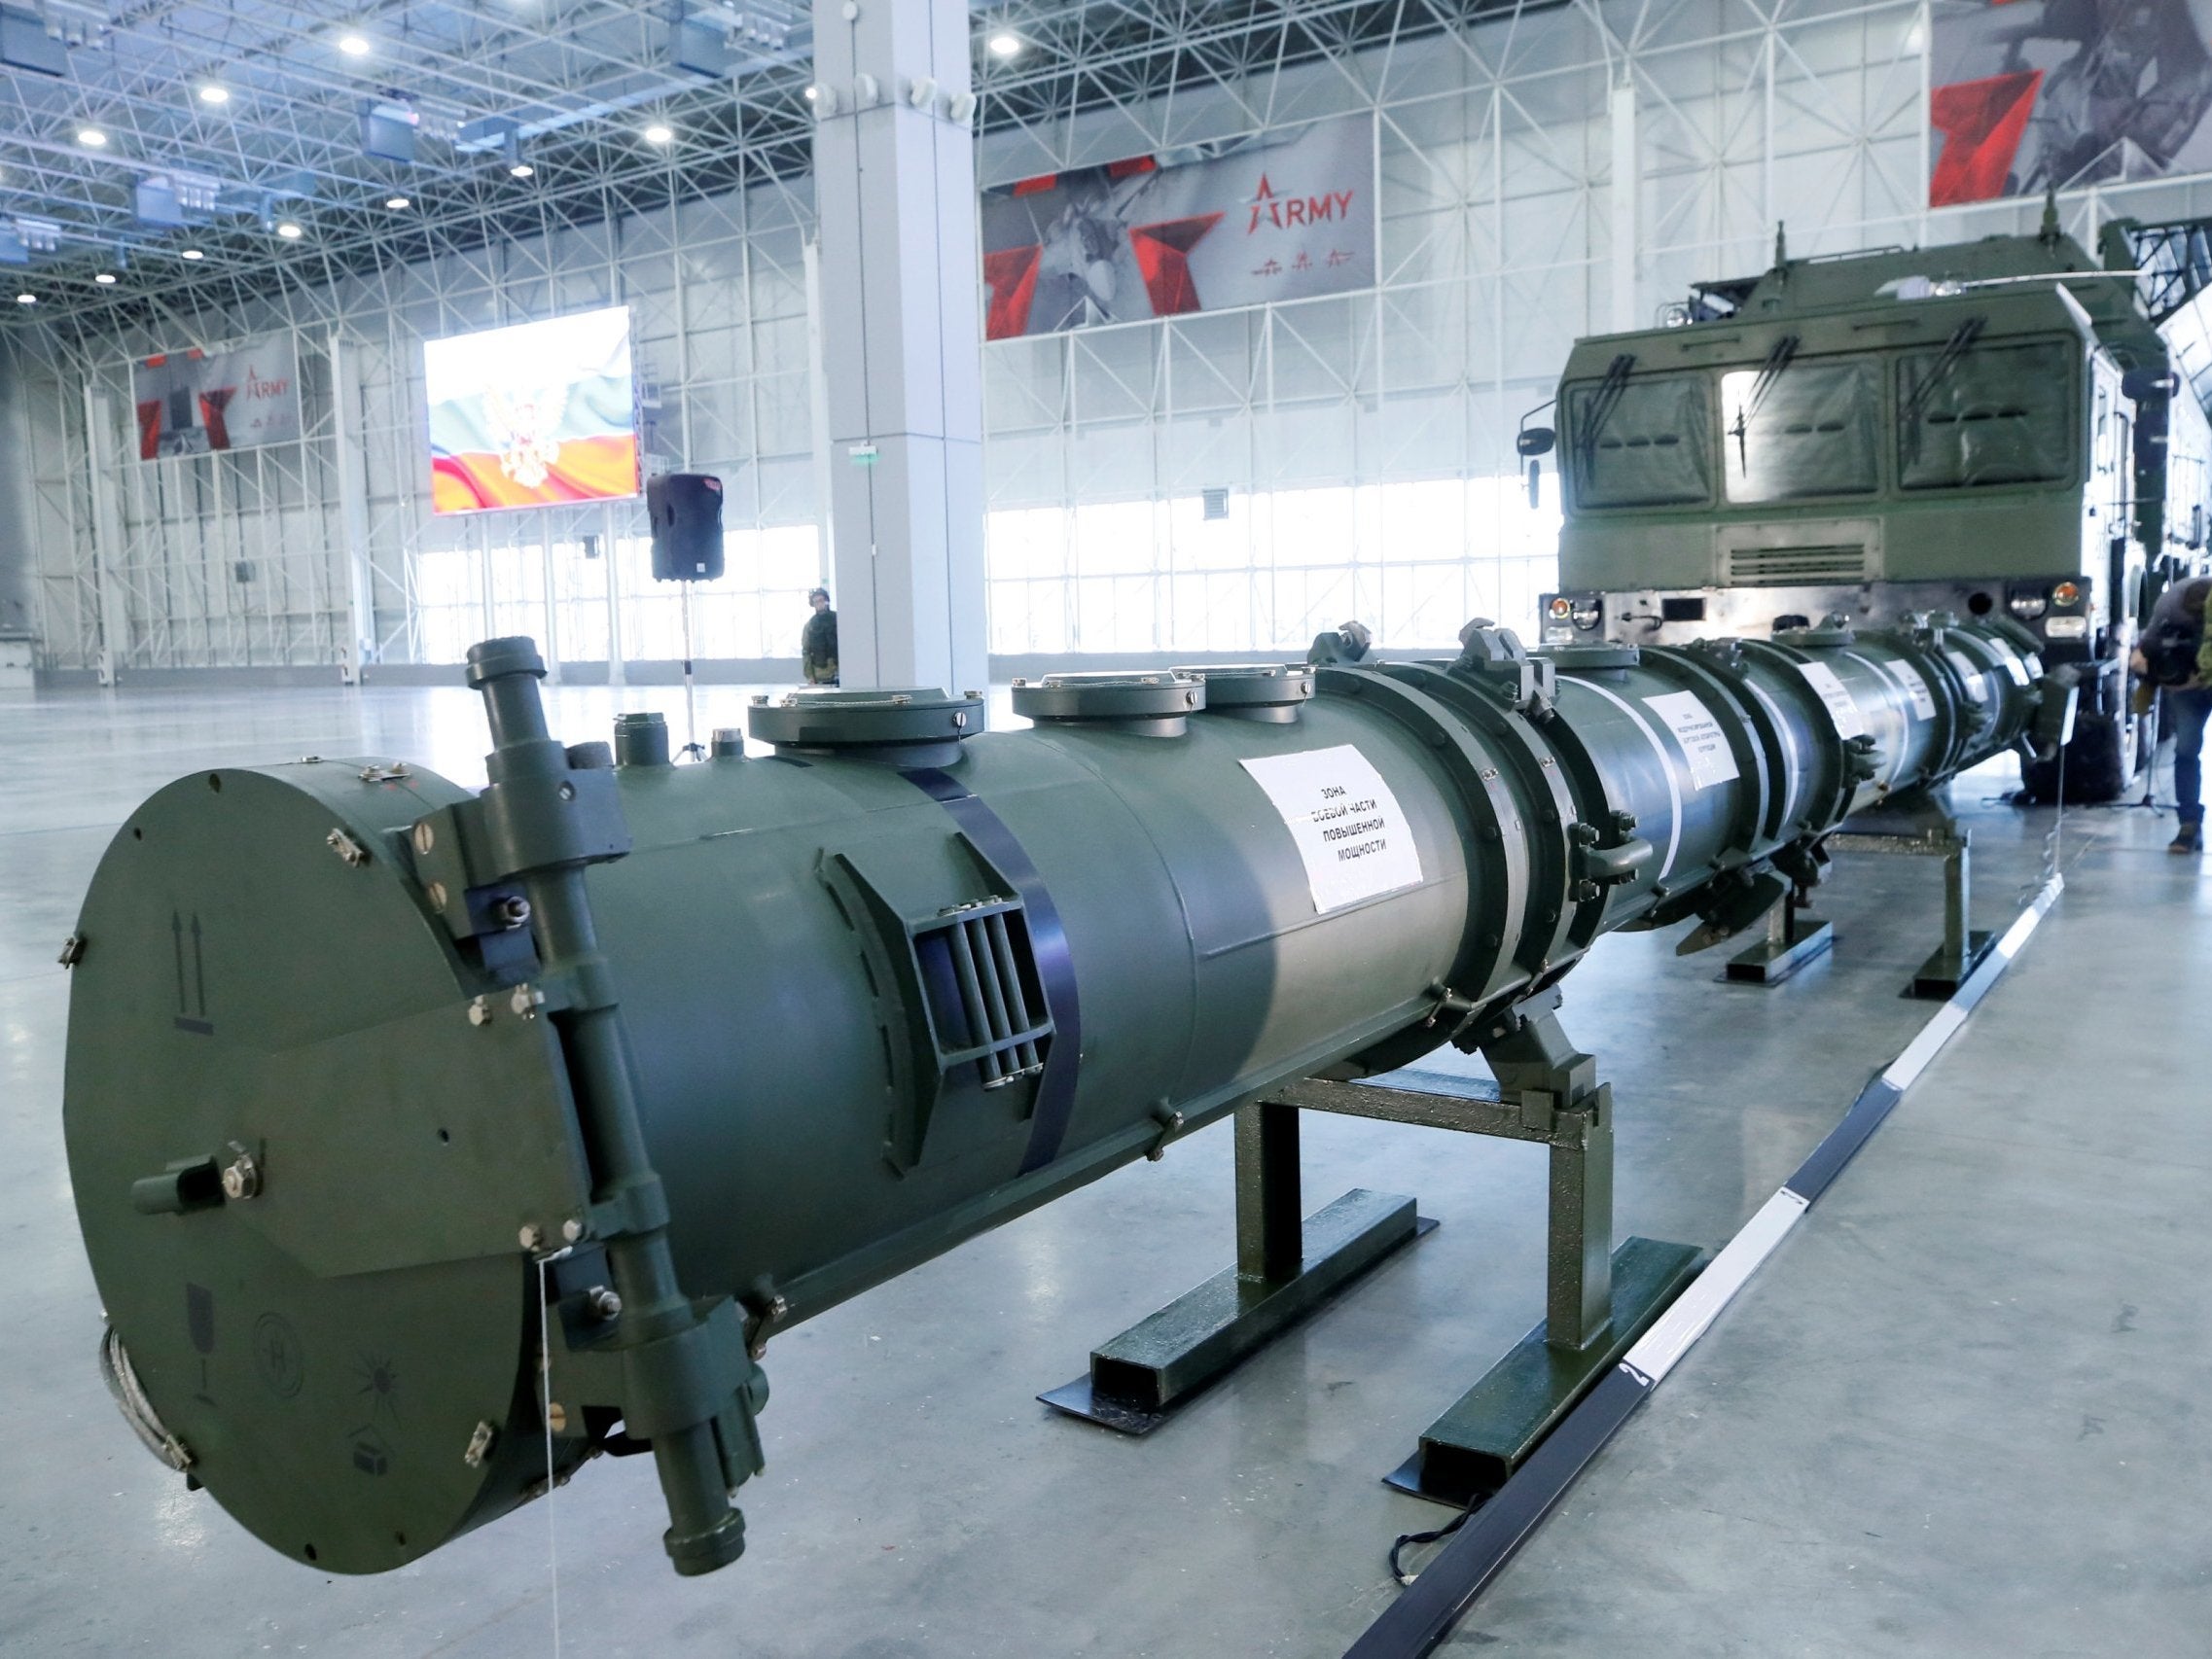 Russia unveils new missile in bid to show US it is not violating arms treaty